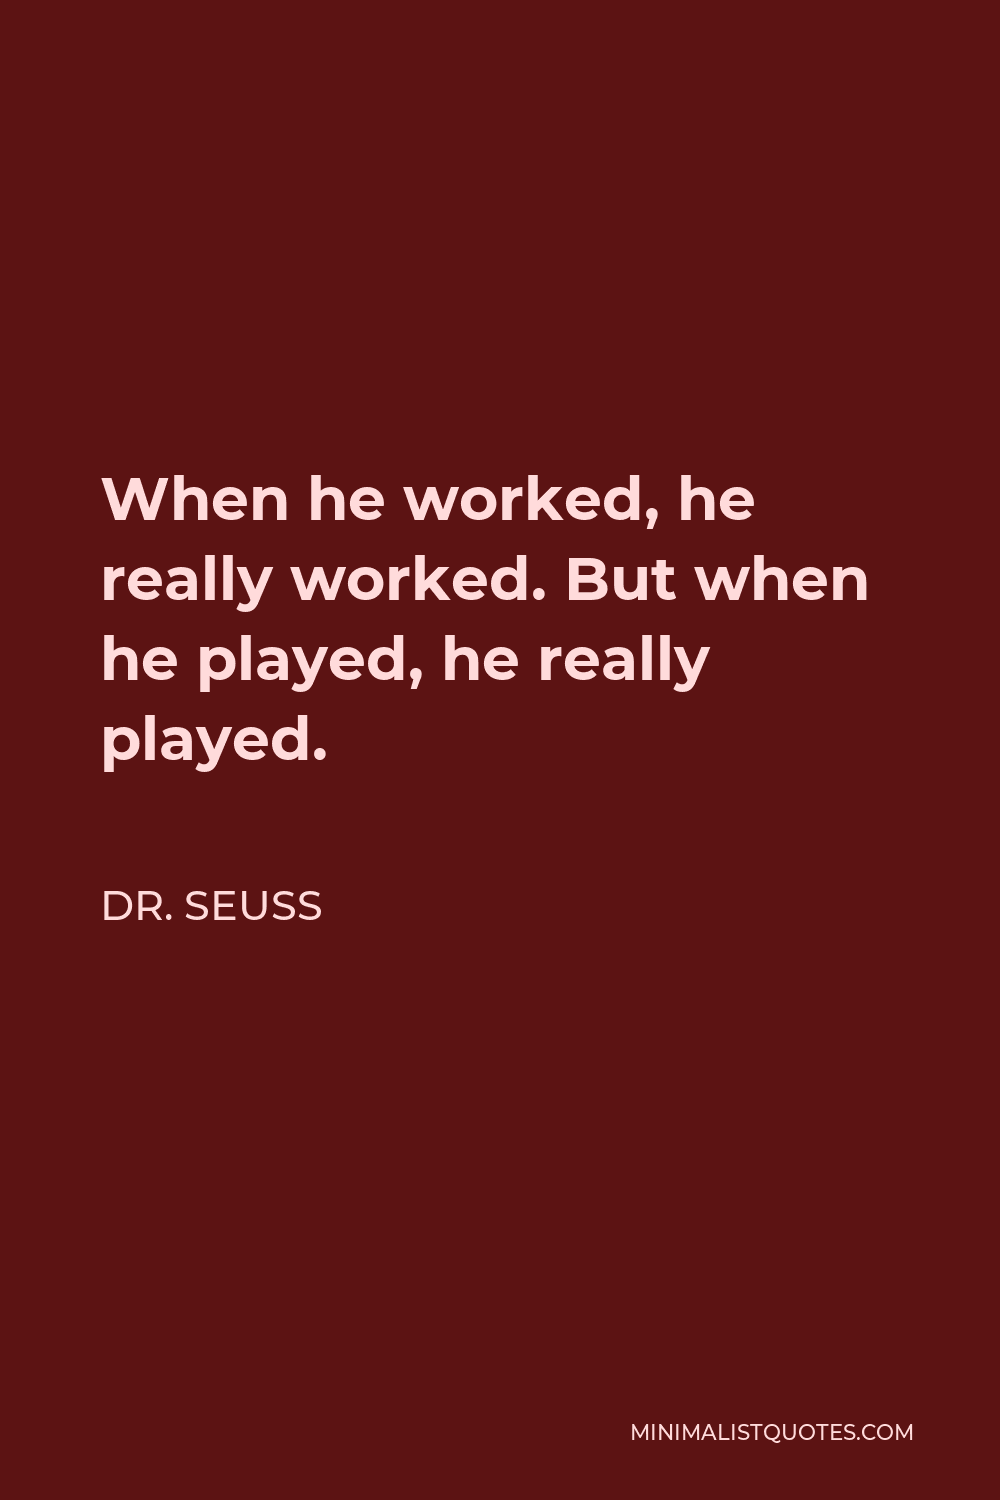 Dr. Seuss Quote - When he worked, he really worked. But when he played, he really played.